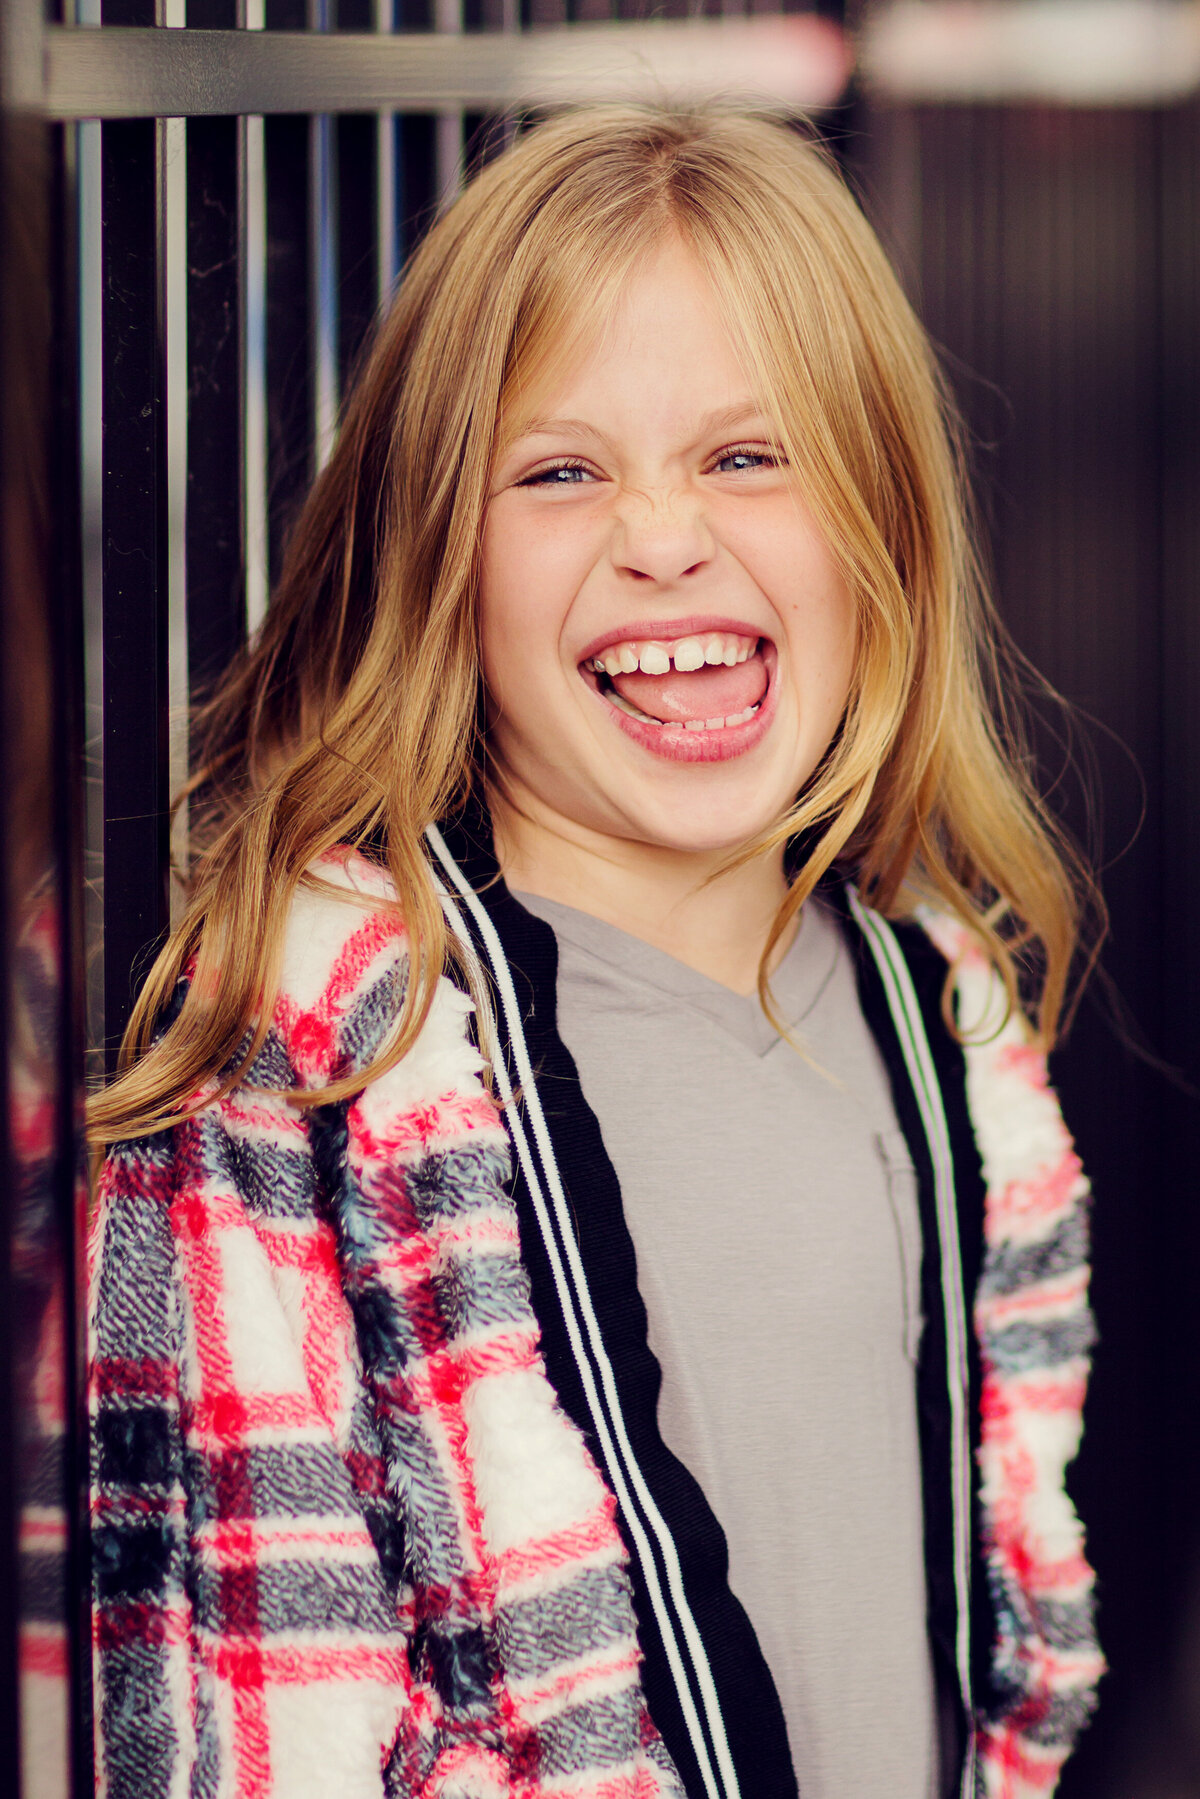 Cute girl laughing hard with a big, crooked smile. She's wearing a plaid jacket that is red, white and black.